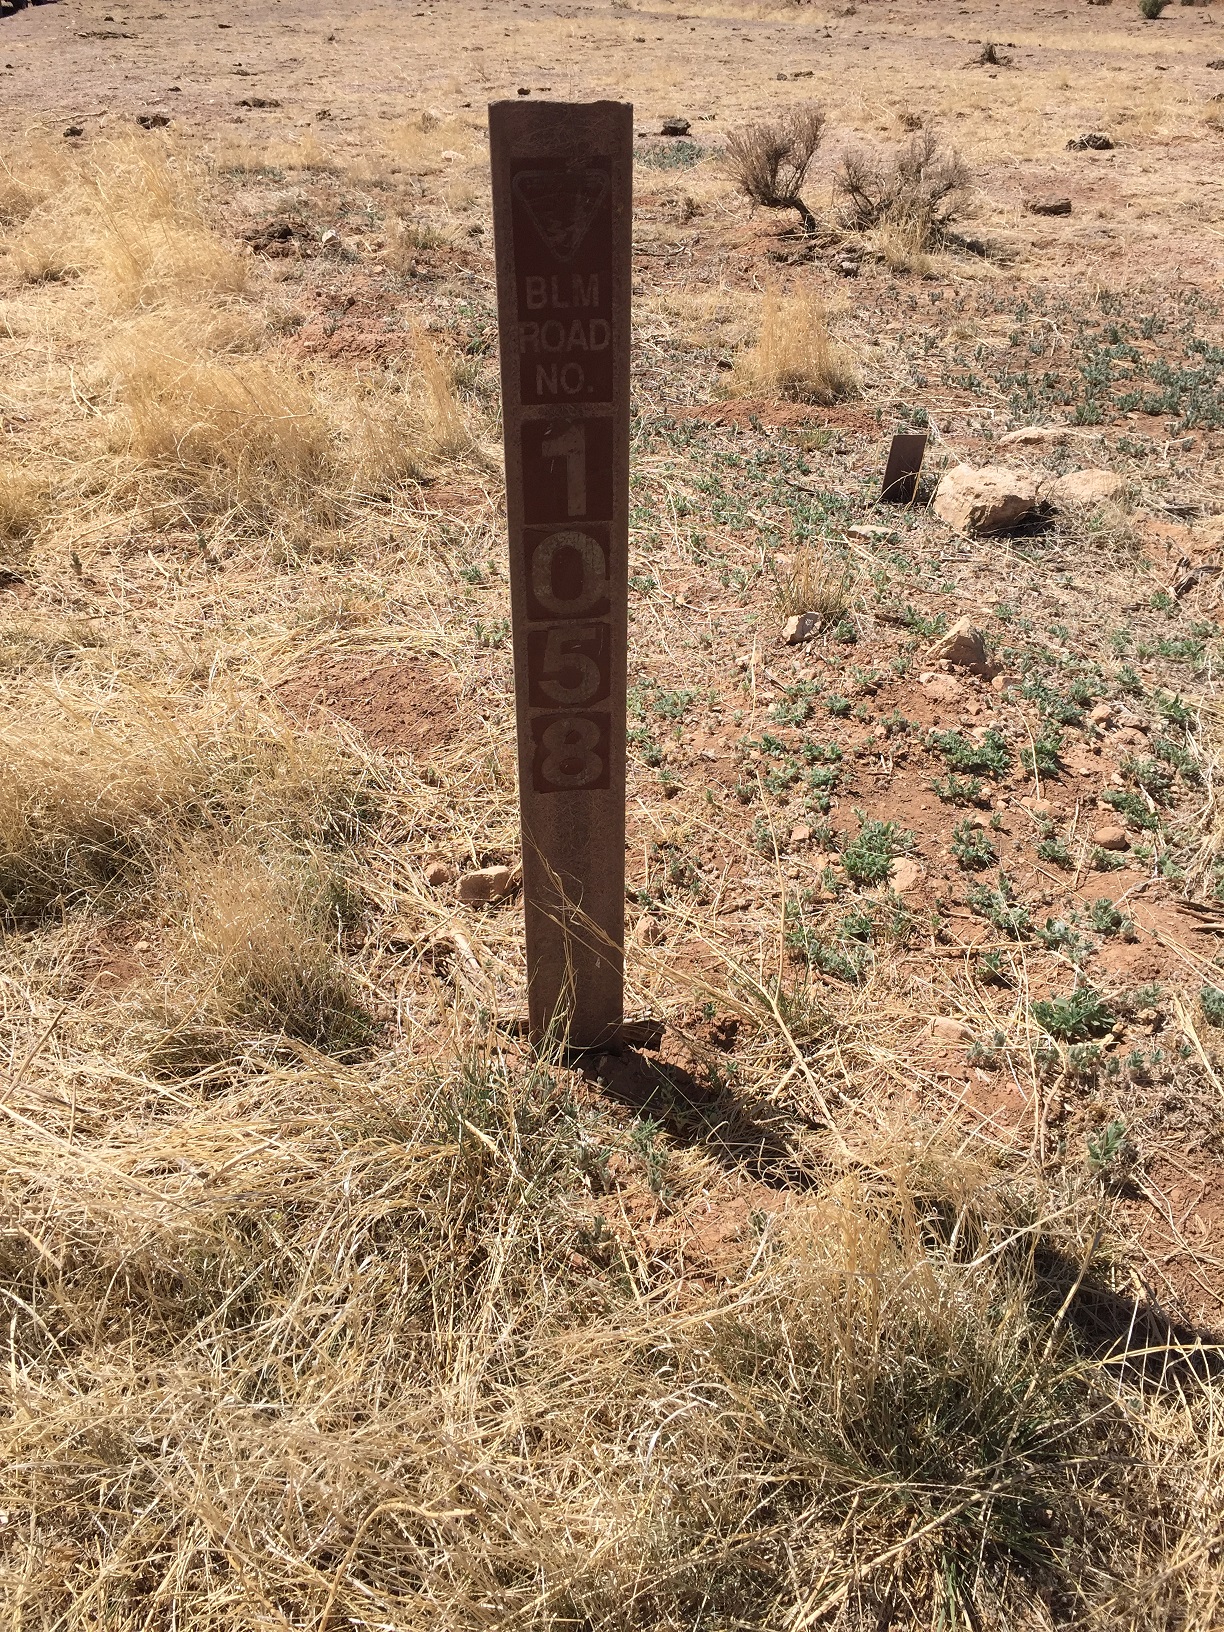 A road marker for BLM Road 1058 on the Arizona Strip